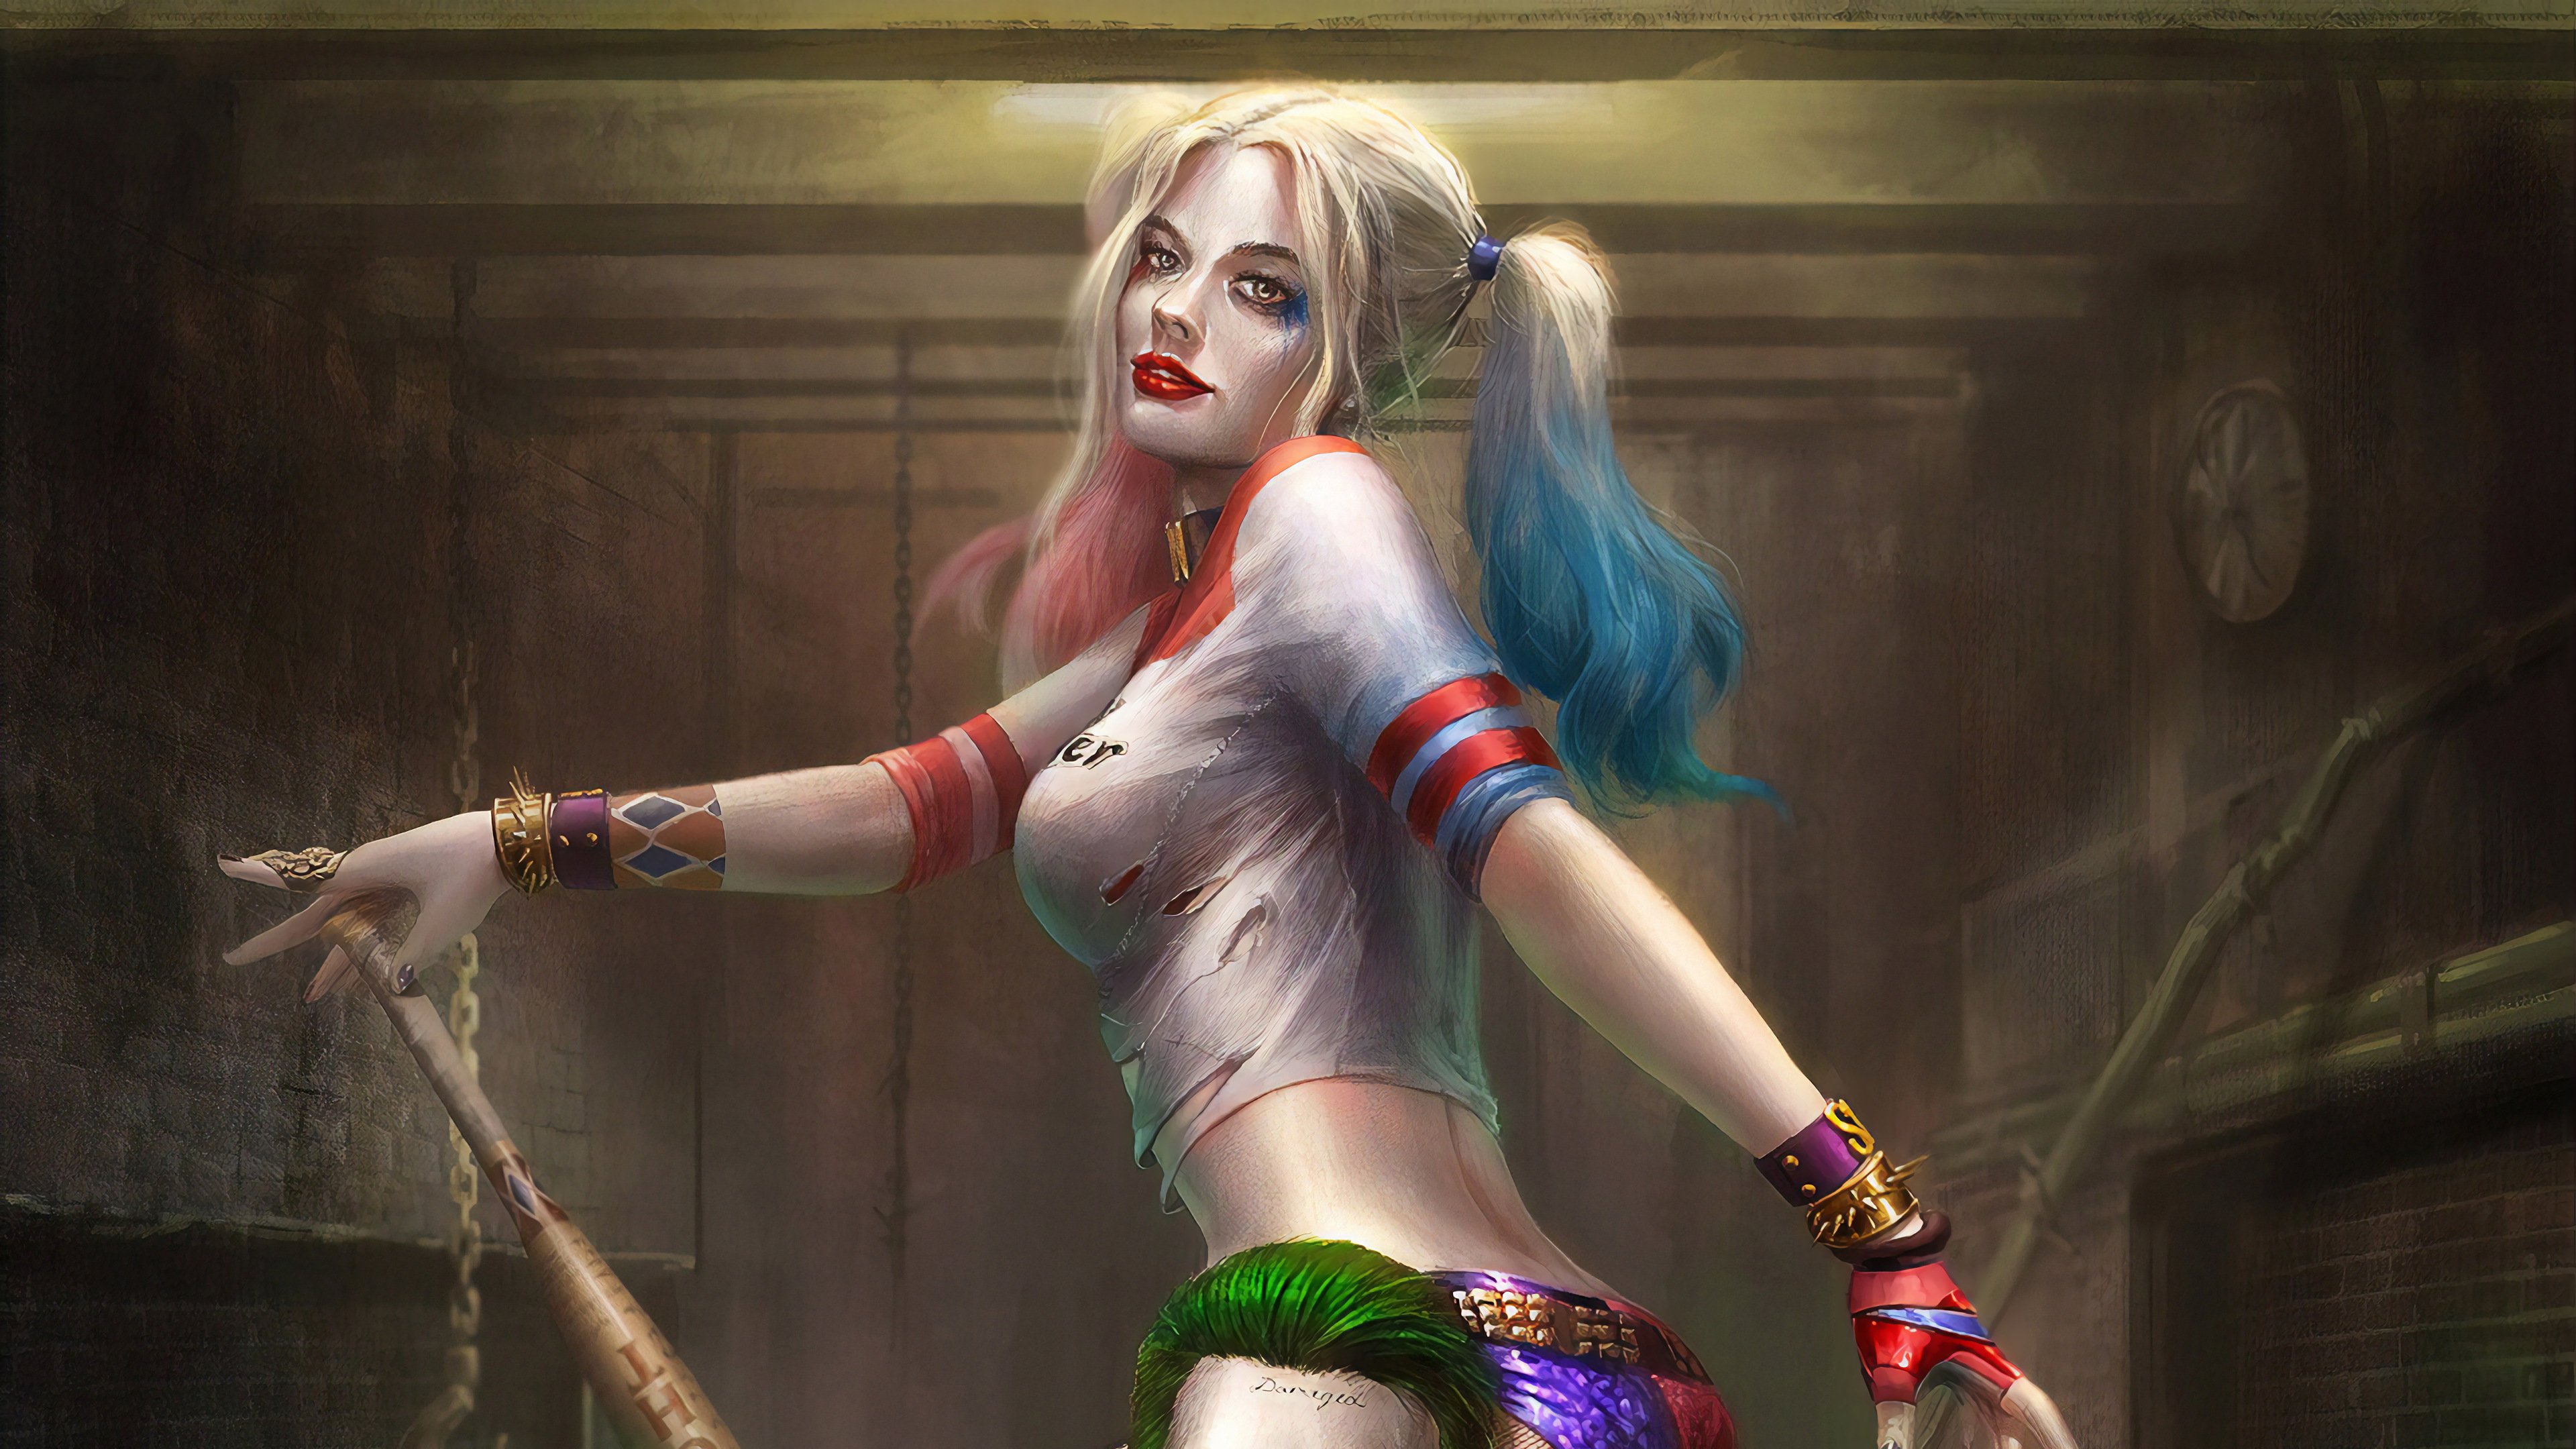 painting from harley quinn wallpaper, dc comics, harley quinn wallpapers.